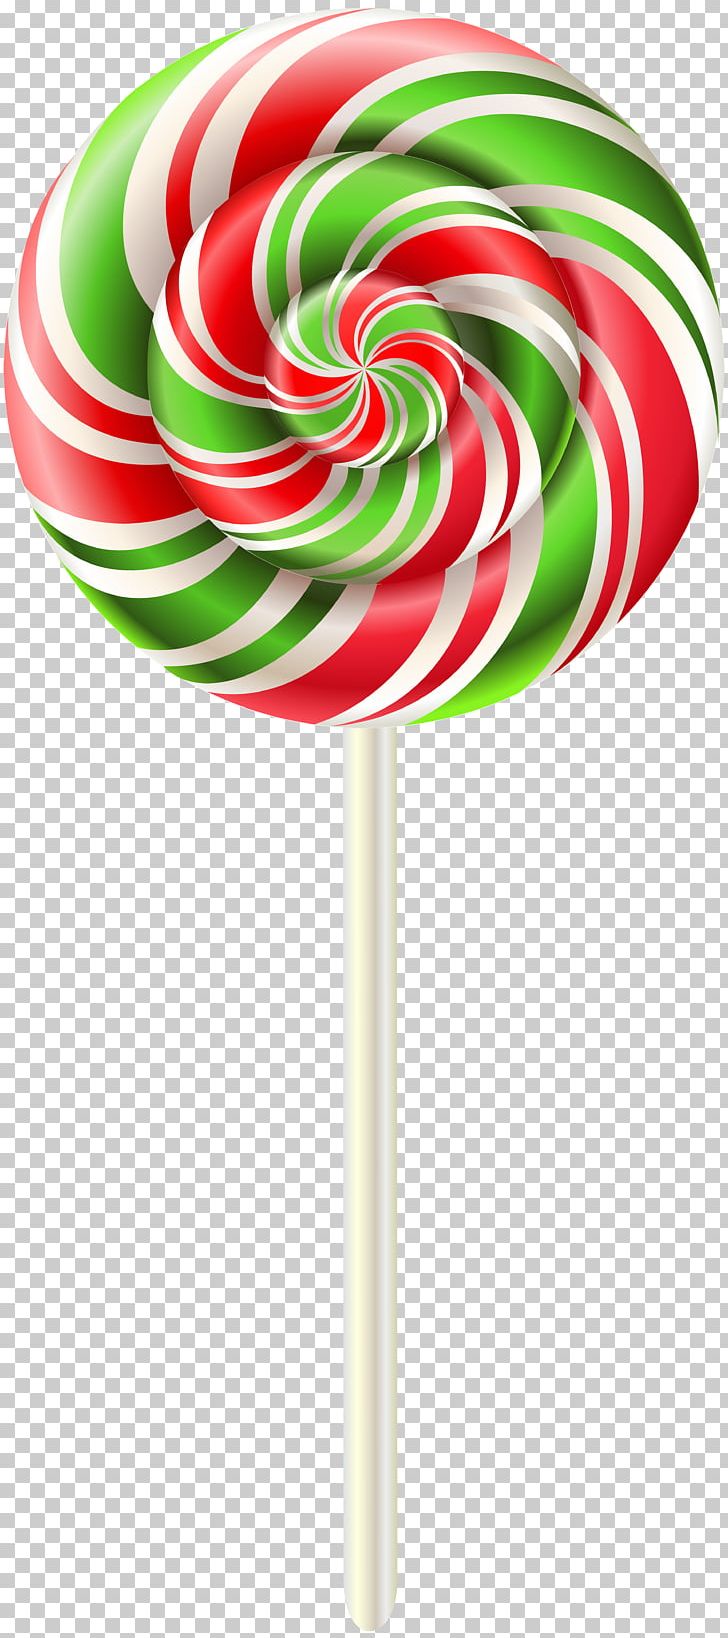 Lollipop Candy Desktop PNG, Clipart, Android Lollipop, Candy, Caramel, Clip Art, Computer Icons Free PNG Download